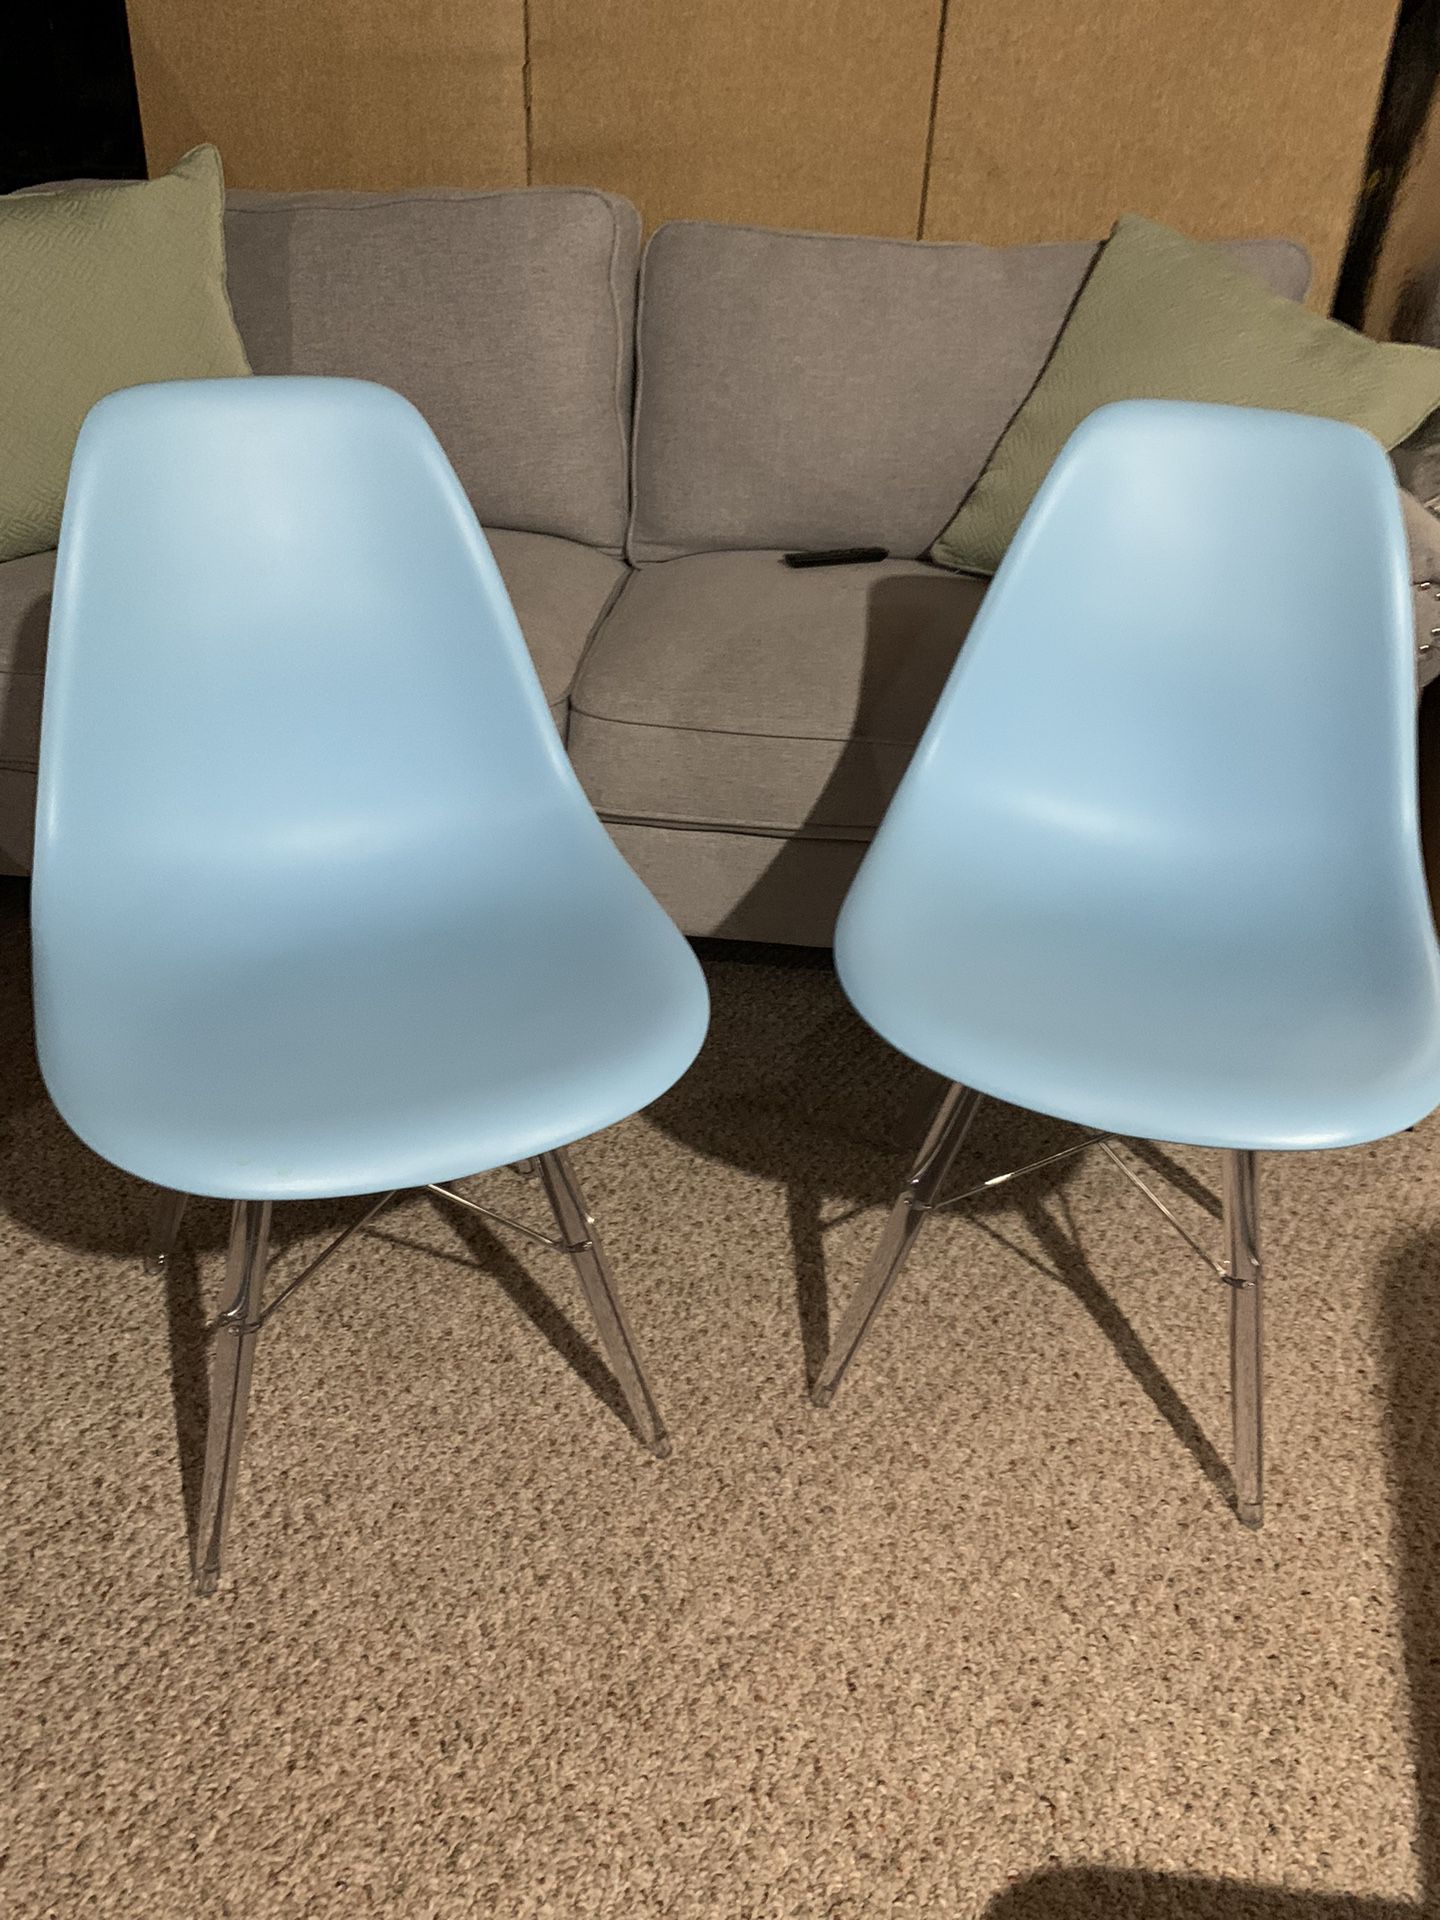 2 Eames Style Chairs